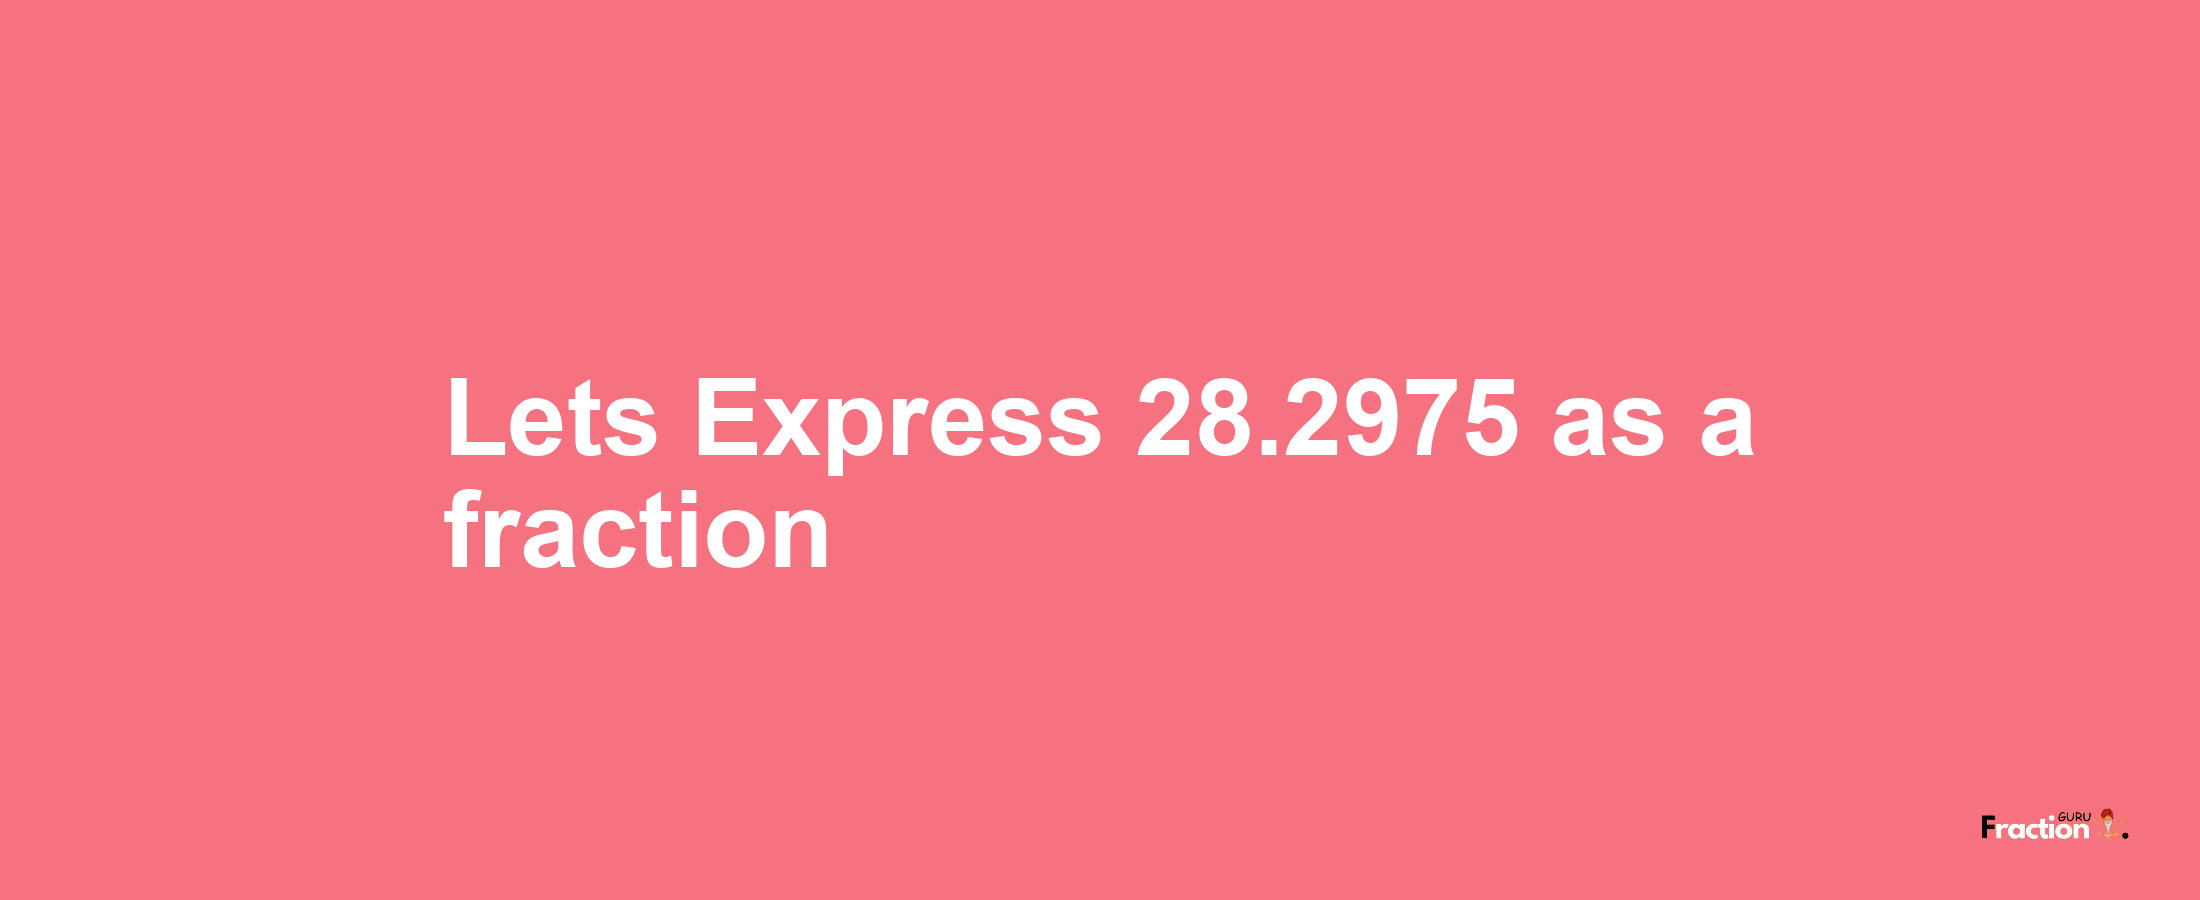 Lets Express 28.2975 as afraction